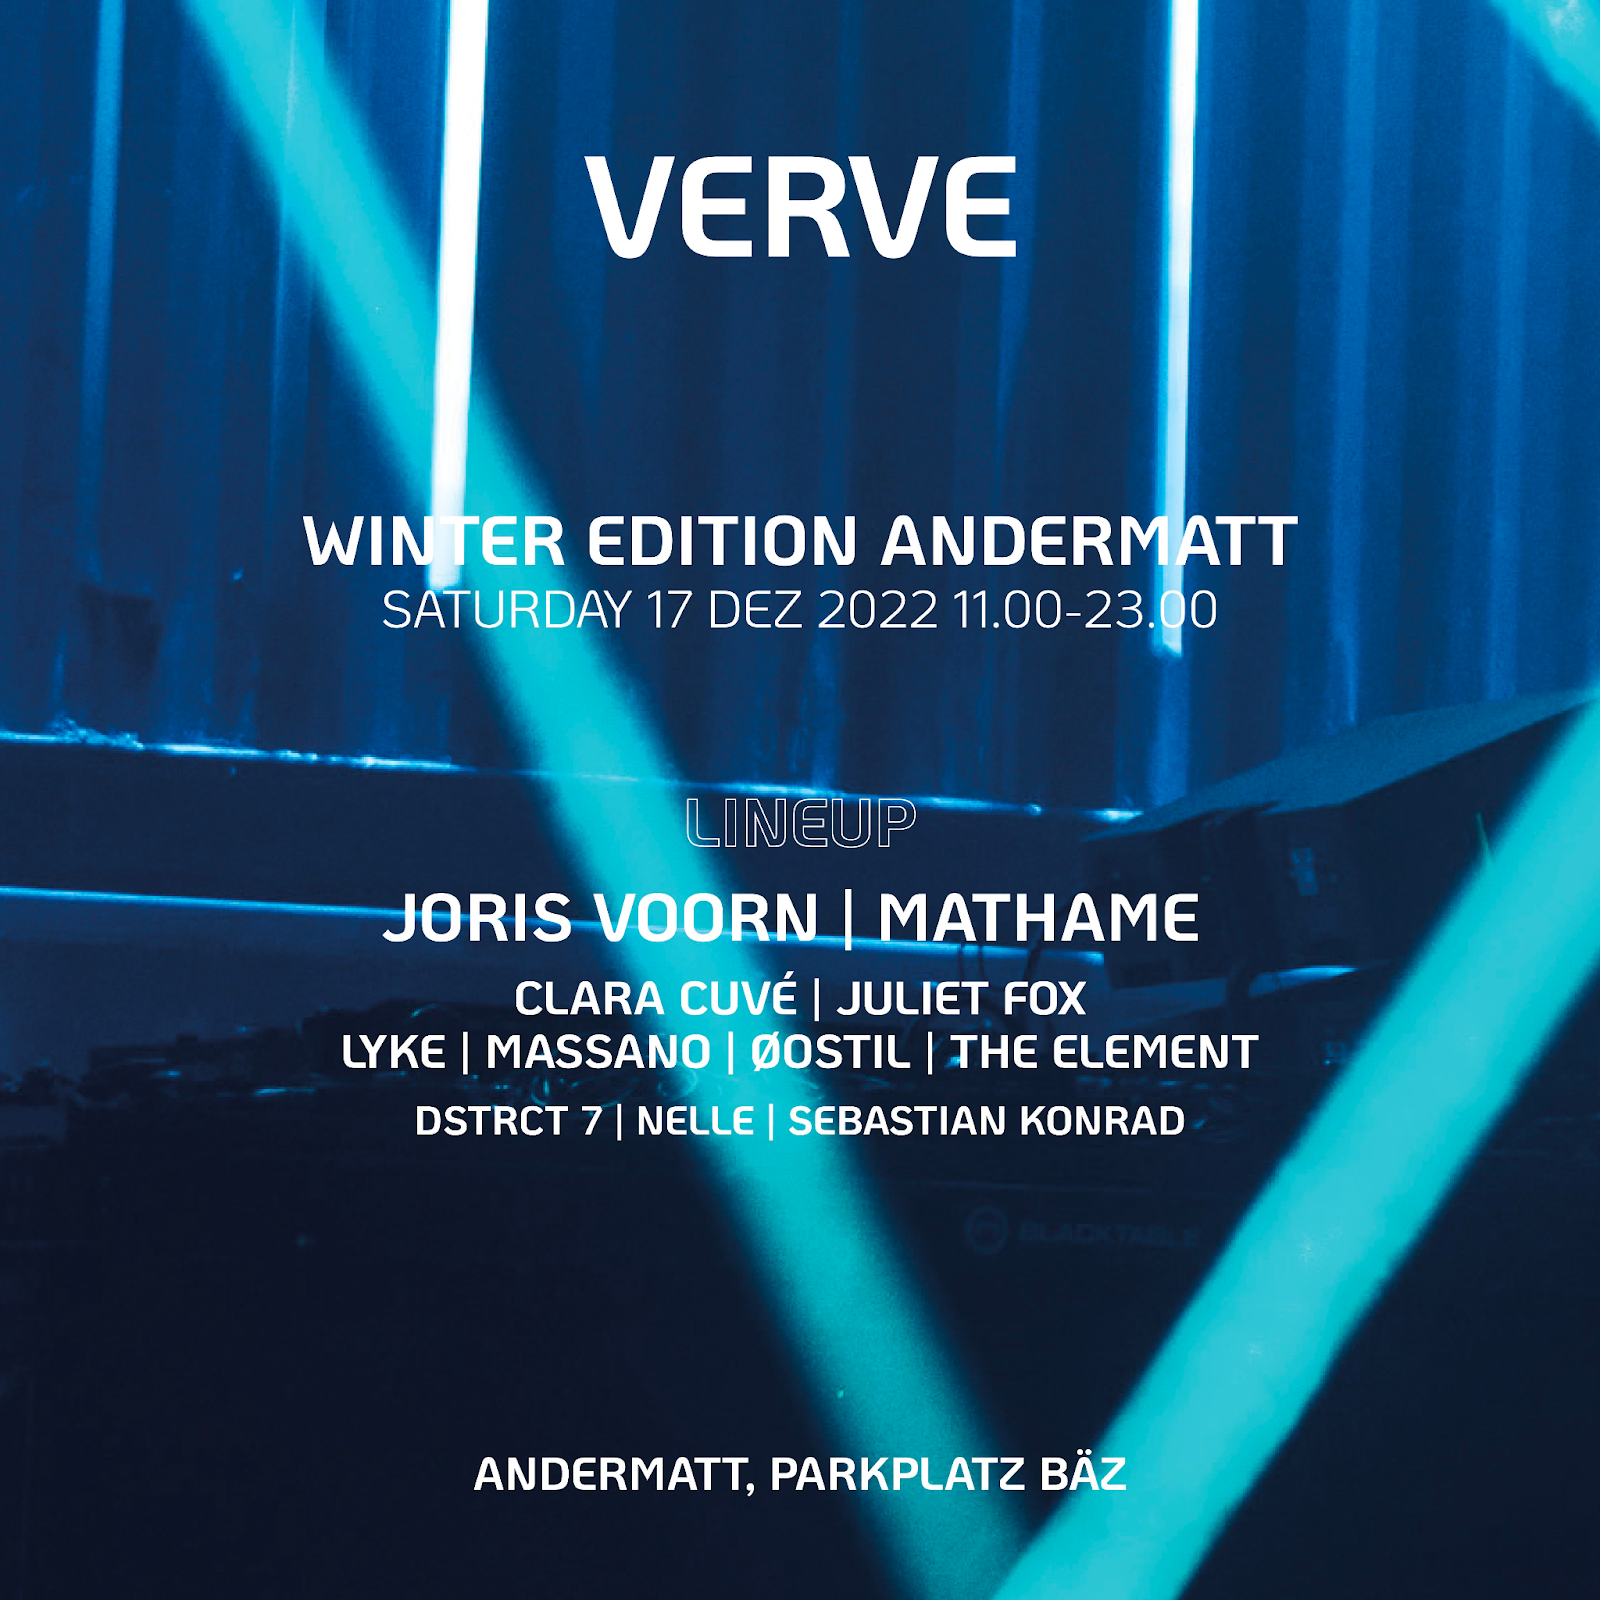 Verve Festival announces 2022 winter edition with first artists